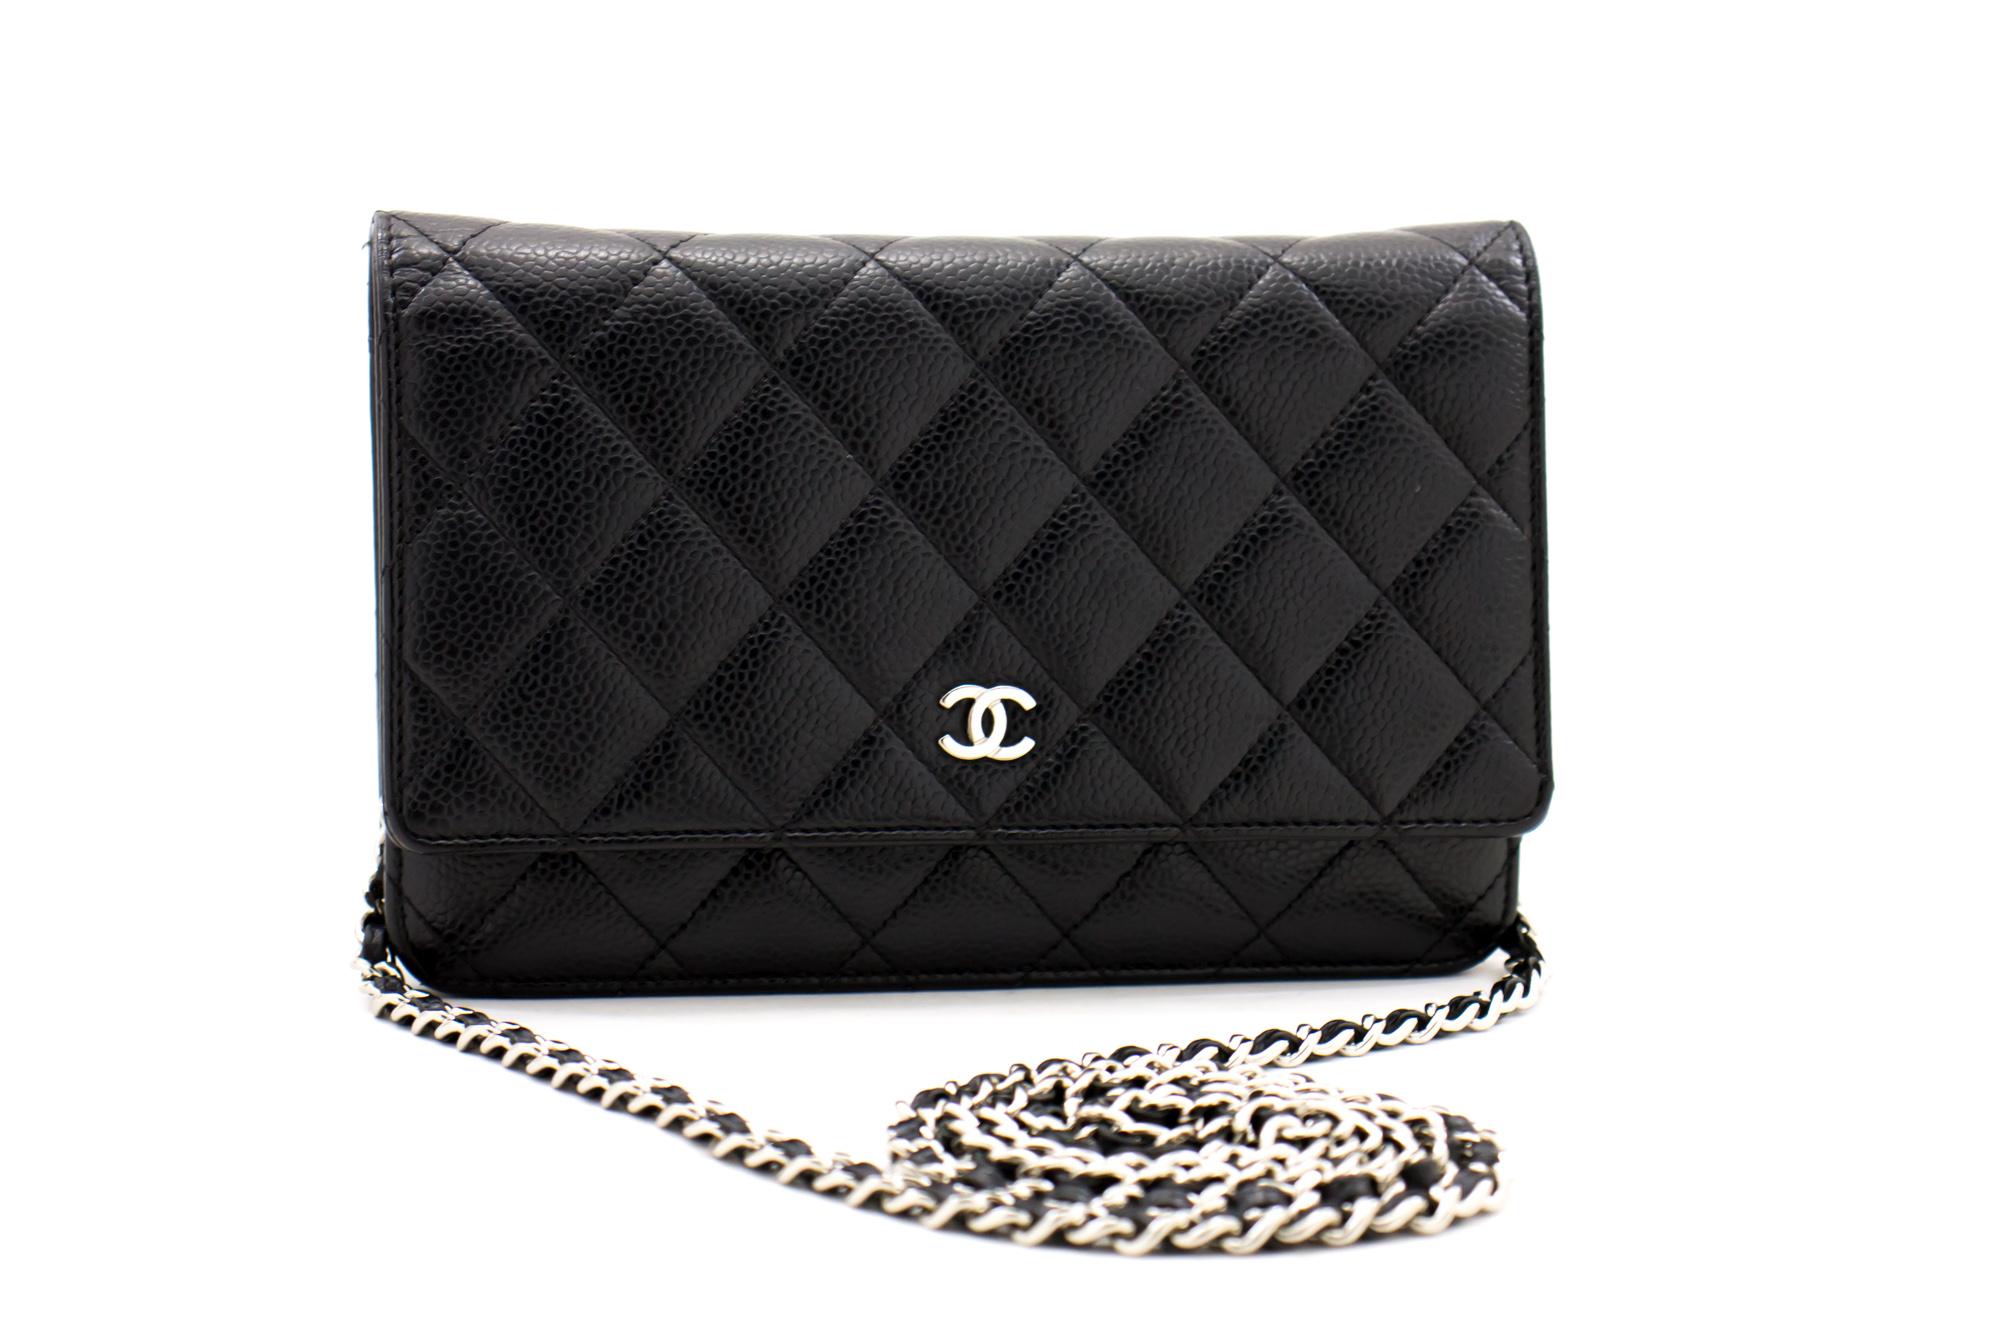 An authentic CHANEL Caviar Wallet On Chain WOC Black Shoulder Bag Crossbody. The color is Black. The outside material is Leather. The pattern is Solid. This item is Contemporary. The year of manufacture would be 2016.
Conditions & Ratings
Outside